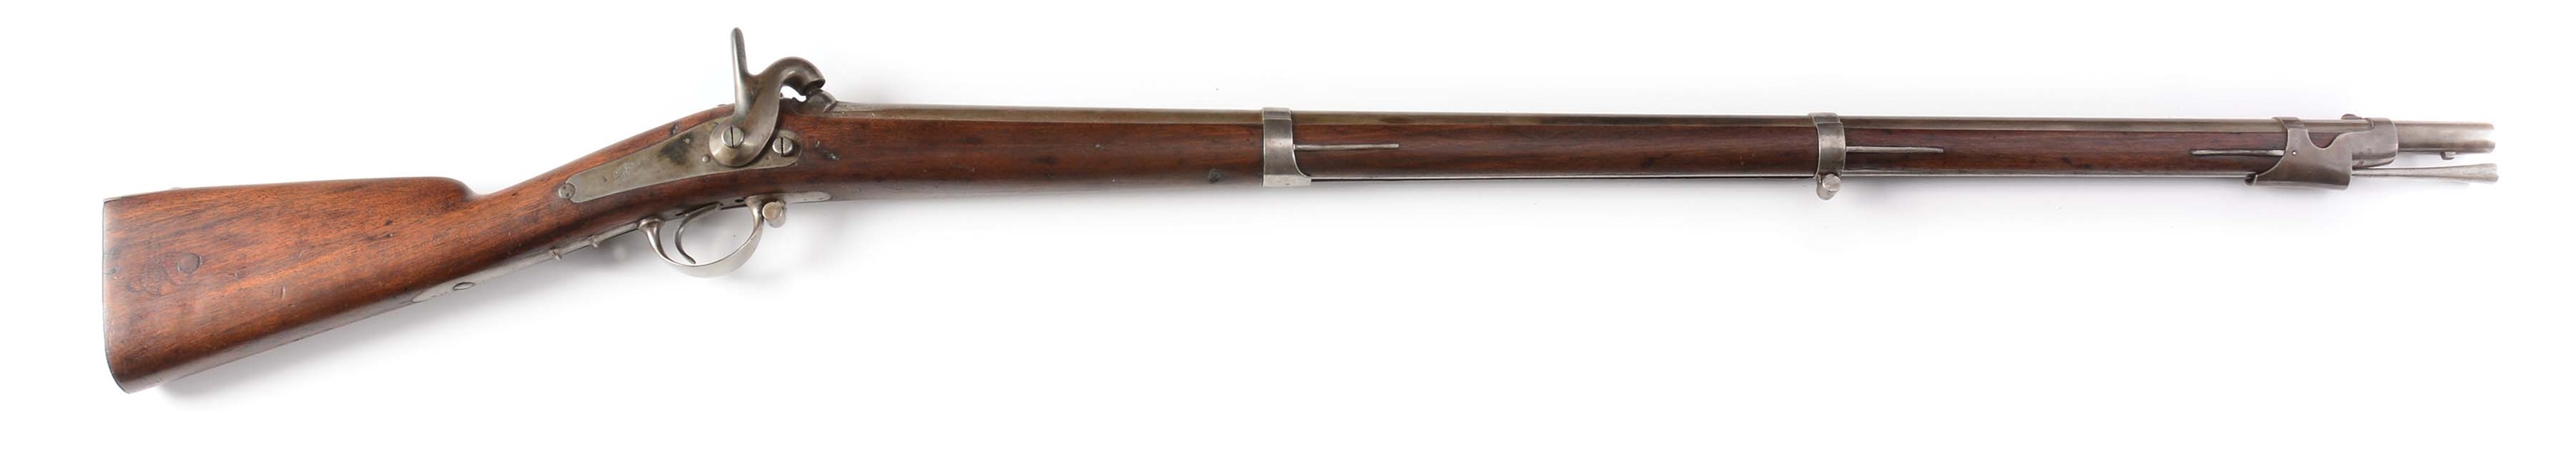 (A) FRENCH MODEL 1842 PERCUSSION RIFLE BY CHATELLERAULT (1848).